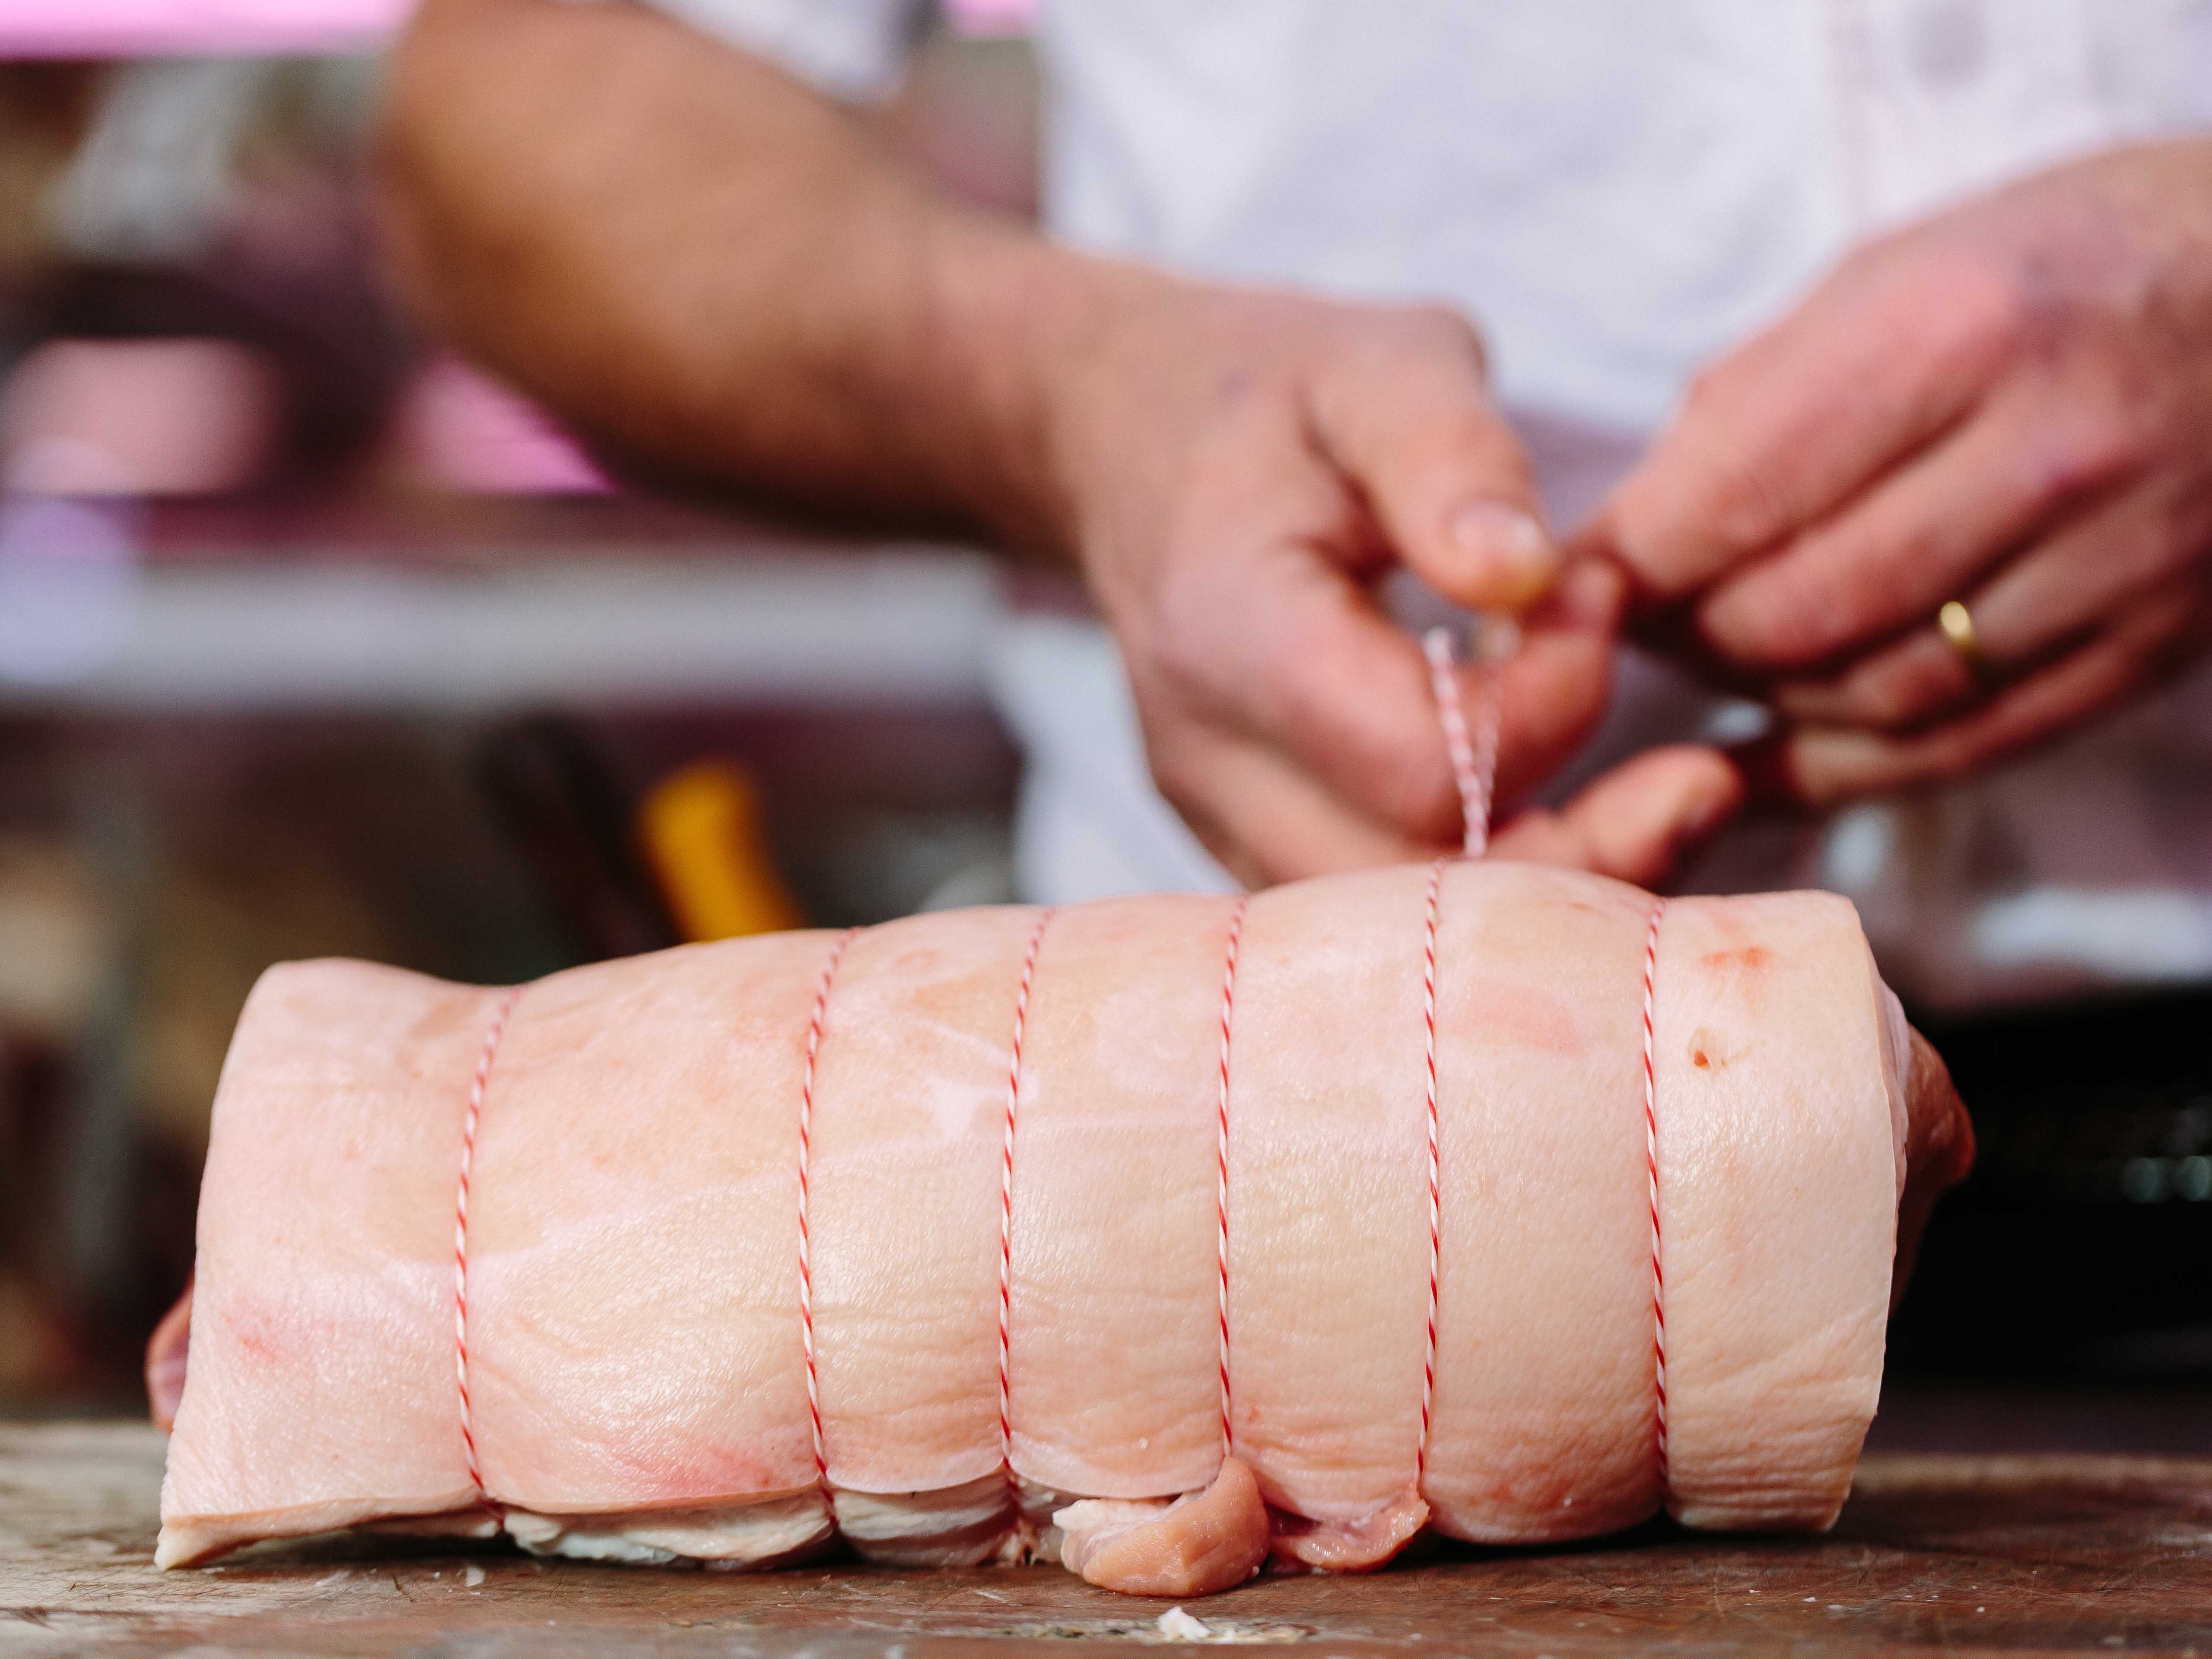 A butcher wrapping twine around a pork roast. Close up, can only see butcher's hands and pork.